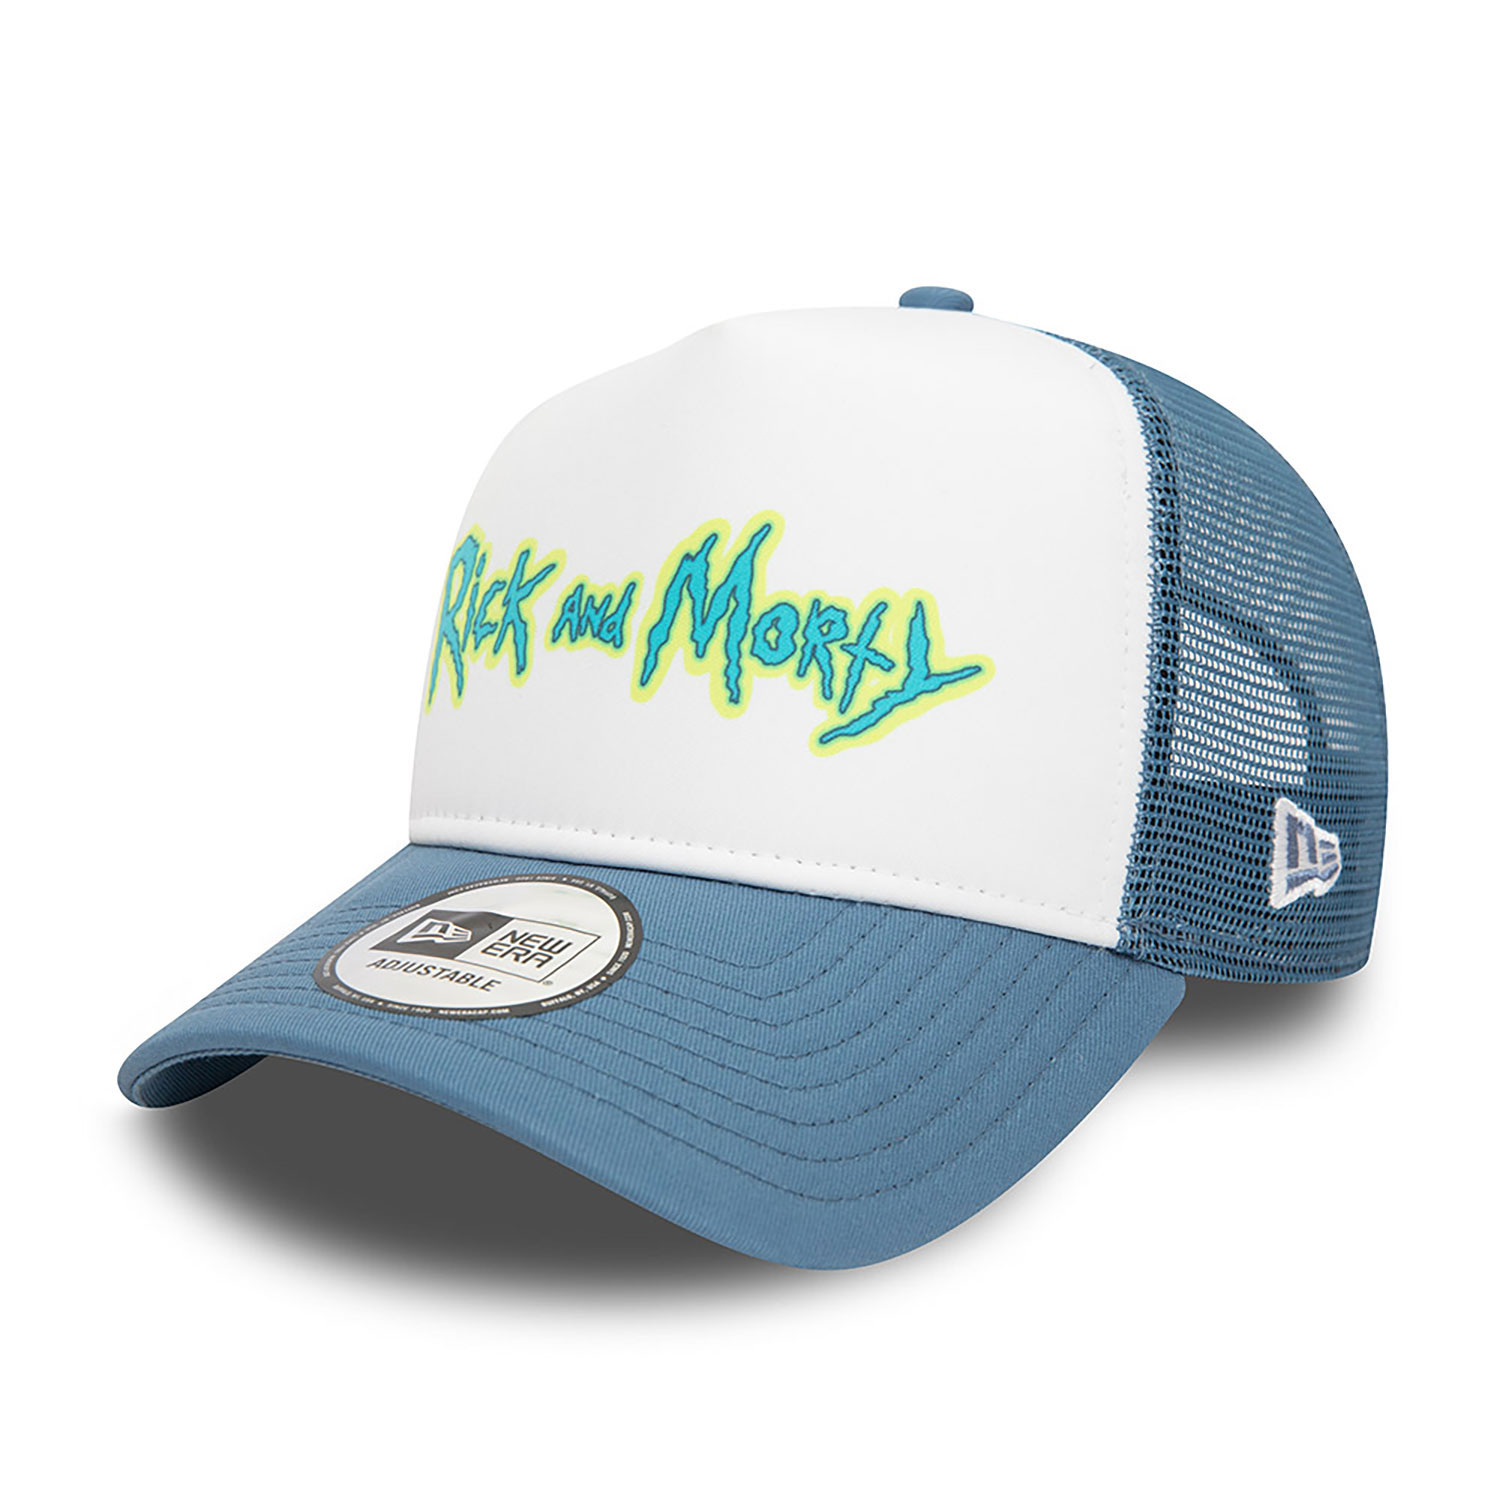 Rick And Morty Wordmark Blue A-Frame Trucker Cap